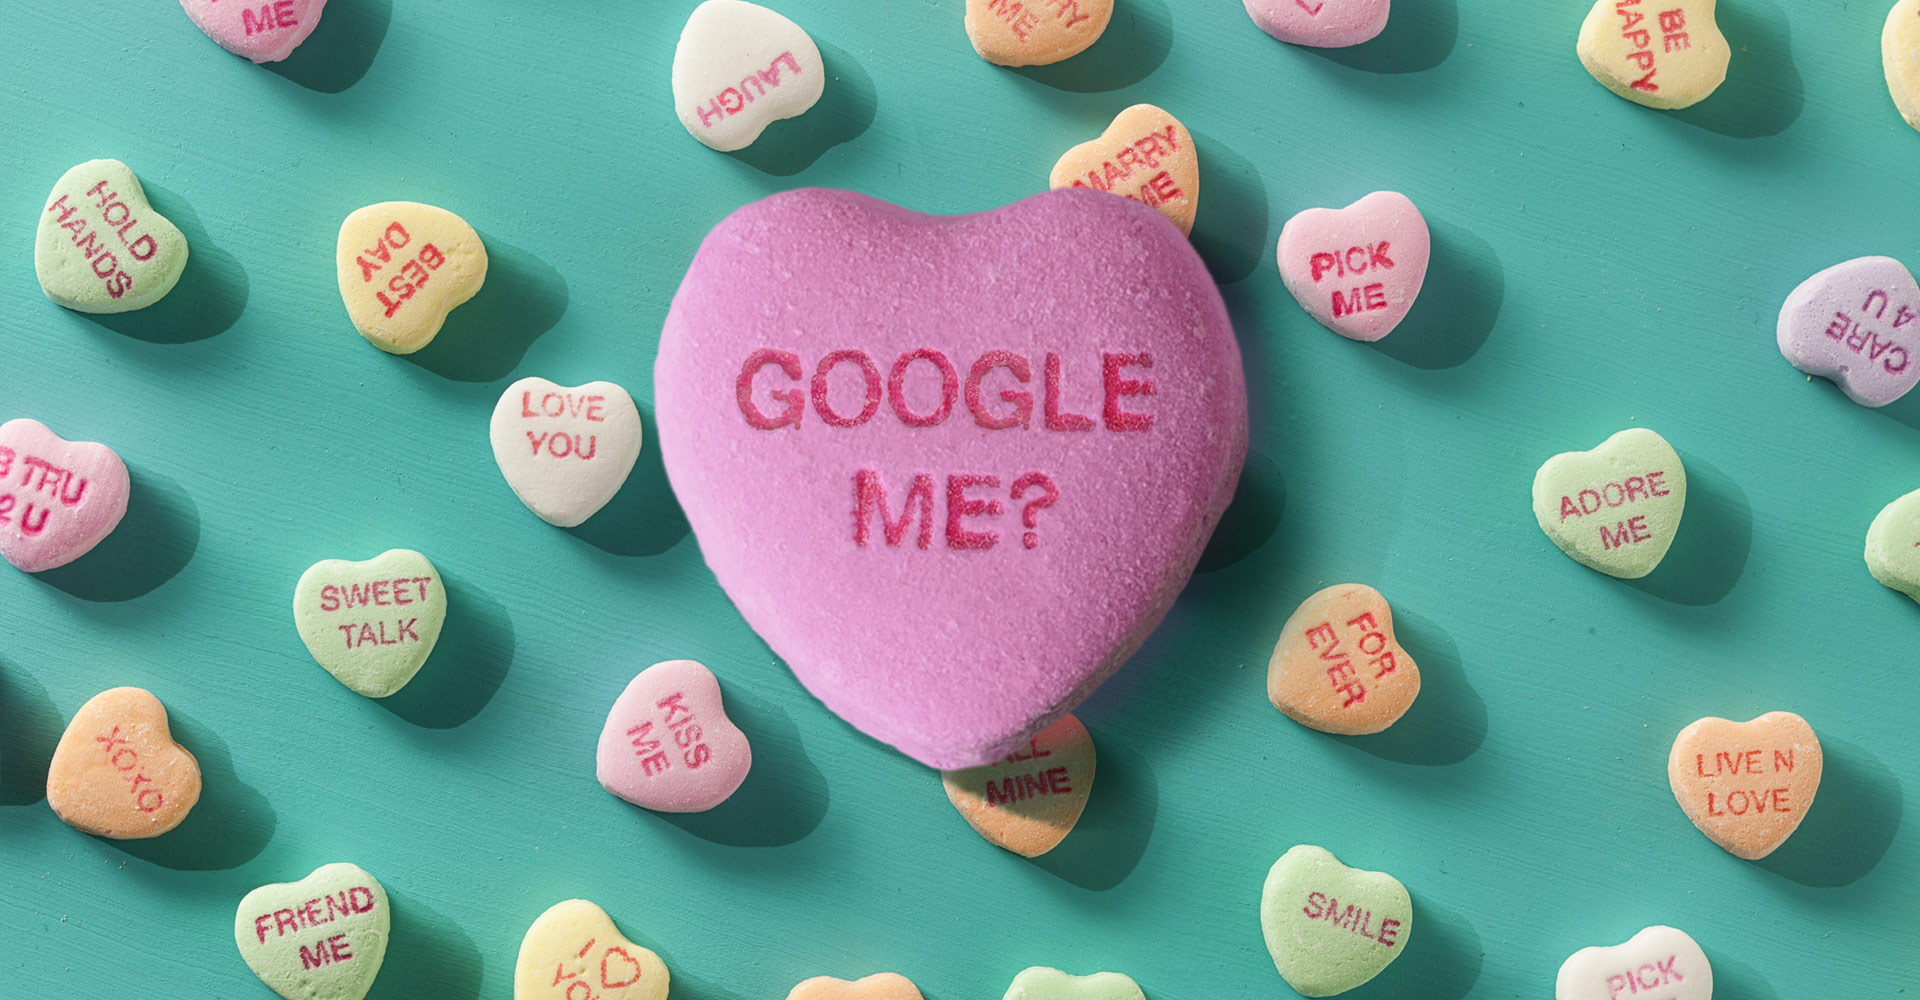 Is your online date Googling you?